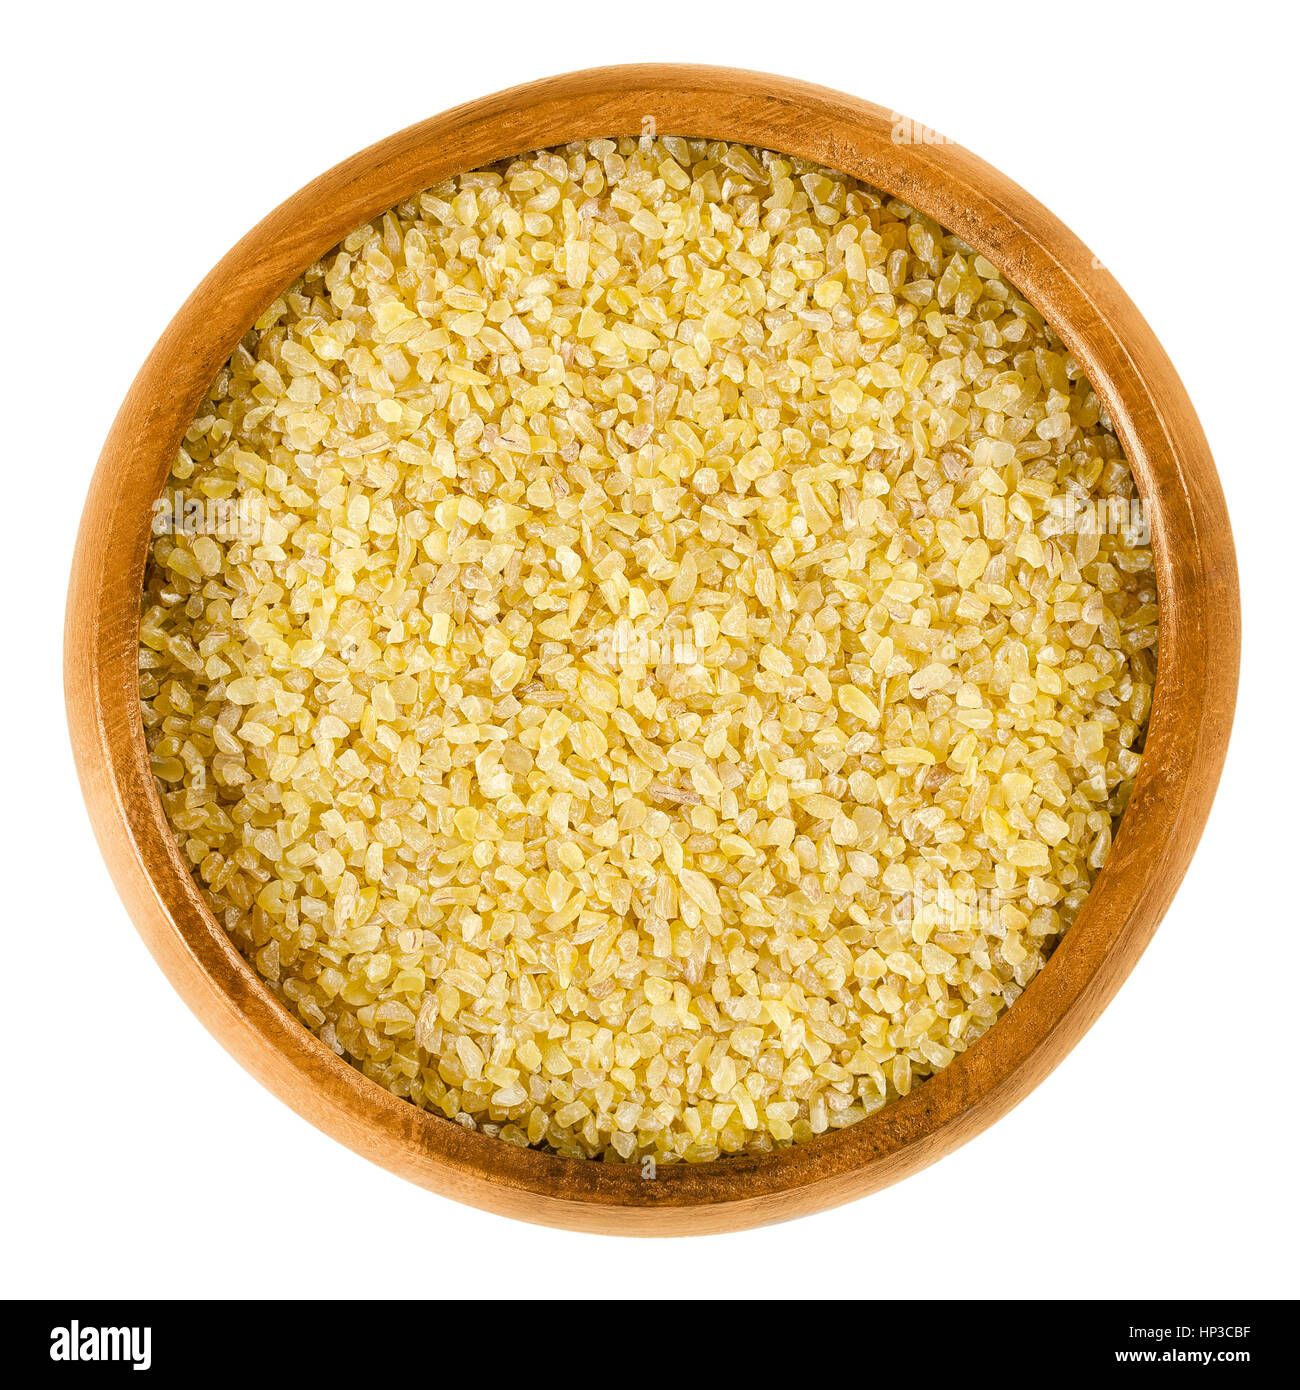 Bulgur in wooden bowl. Uncooked cereal food, most often made from groats of durum wheat. Also called burghul, a kind of dried cracked wheat. Stock Photo